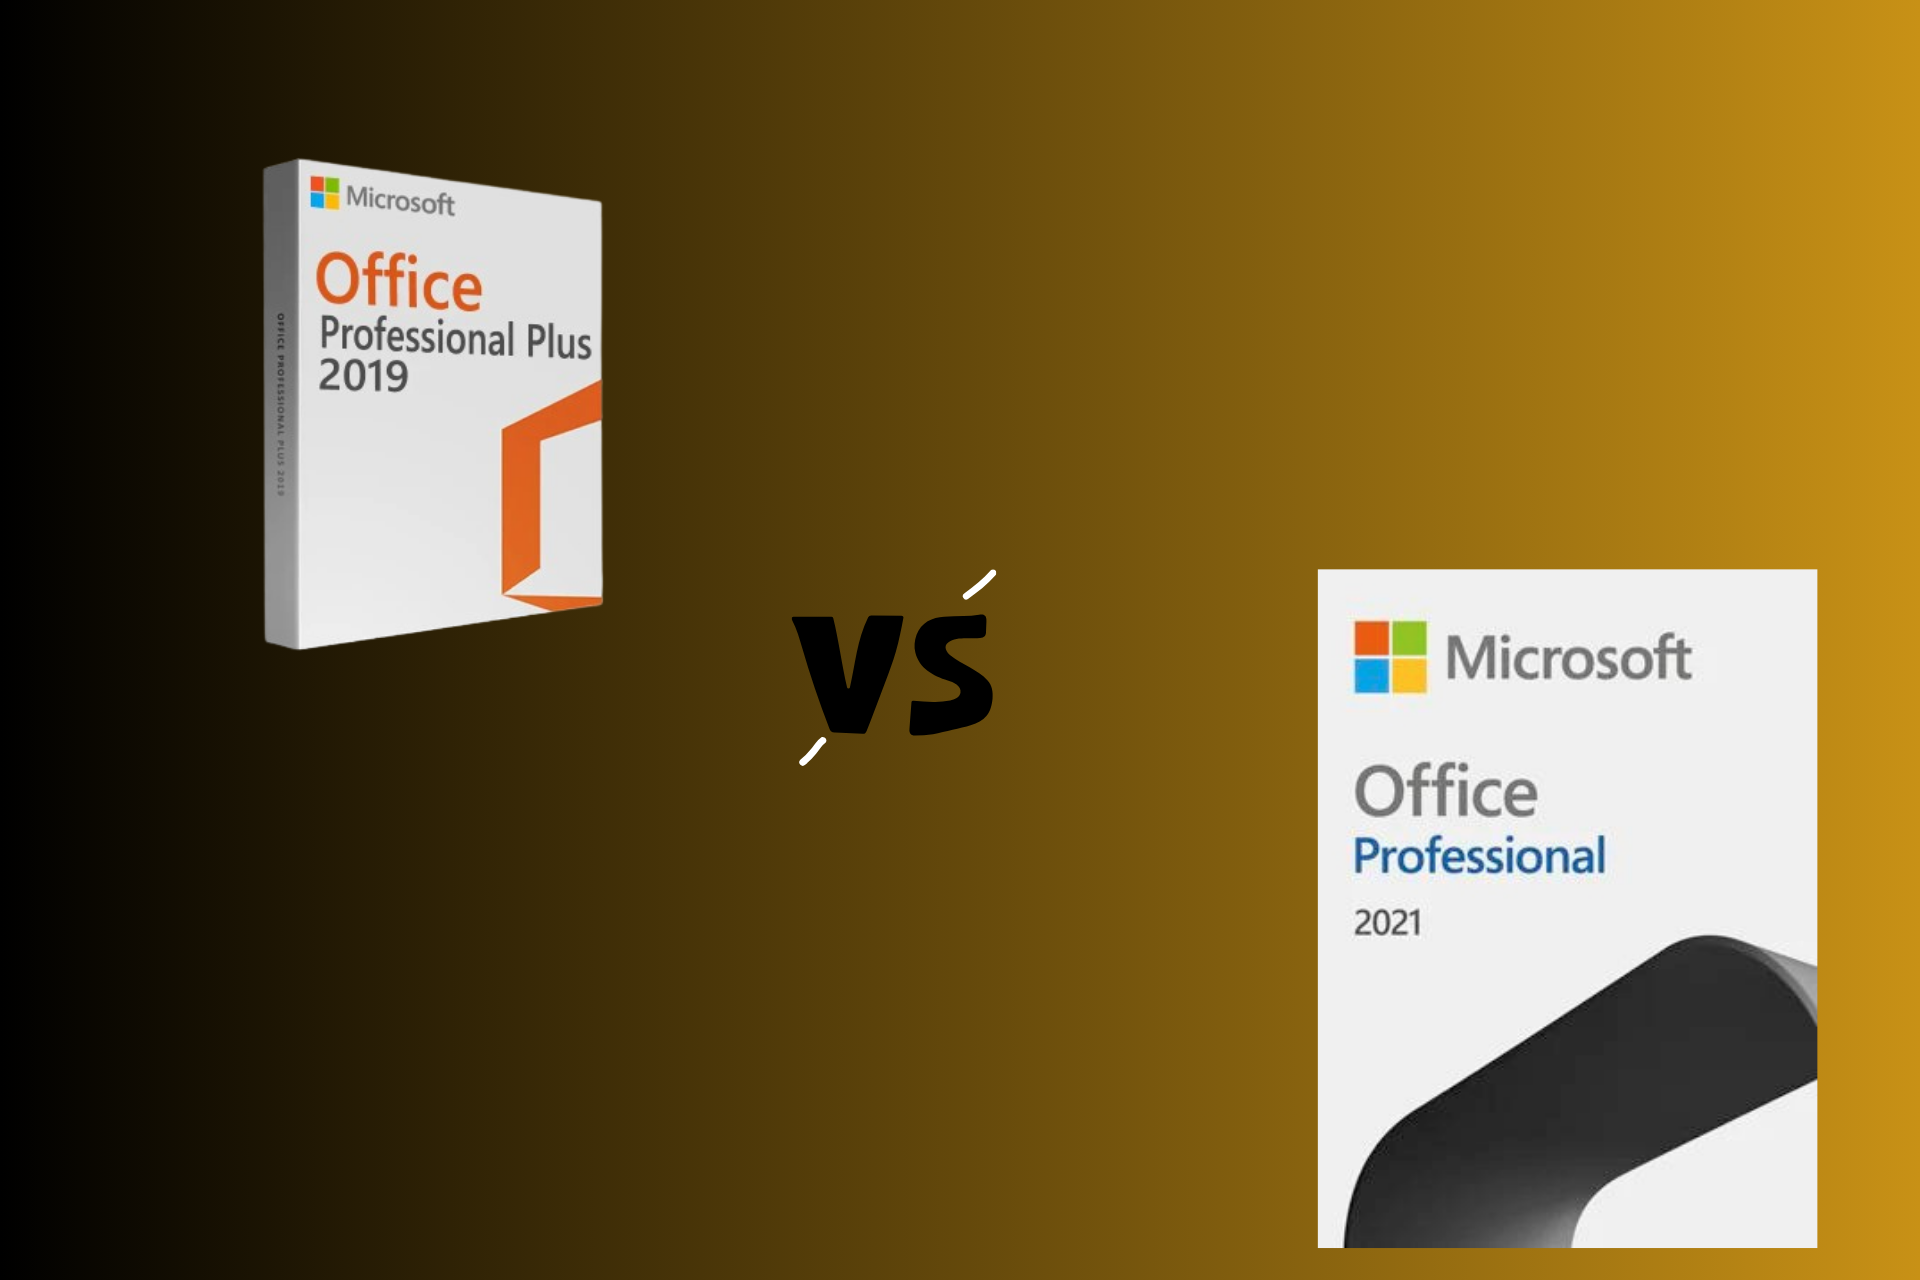 Microsoft Office 2019 vs 2021: What's the Difference?